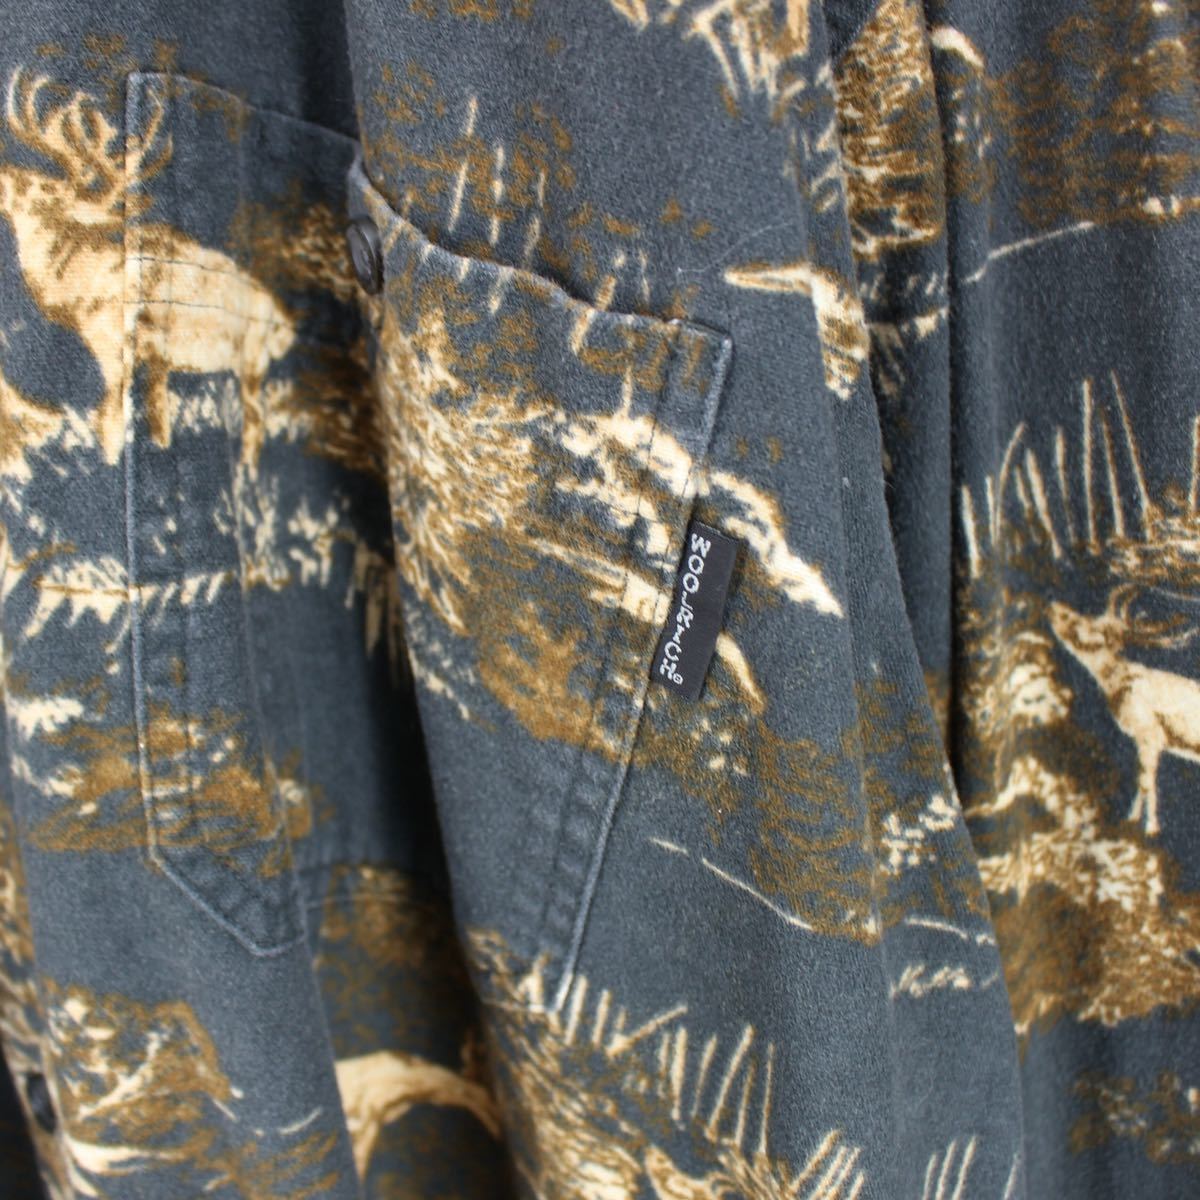 USA VINTAGE WOOL RICH DEER PATTERNED LONG SLEEVE SHIRT/アメリカ古着ウールリッチ鹿柄長袖シャツ_画像5